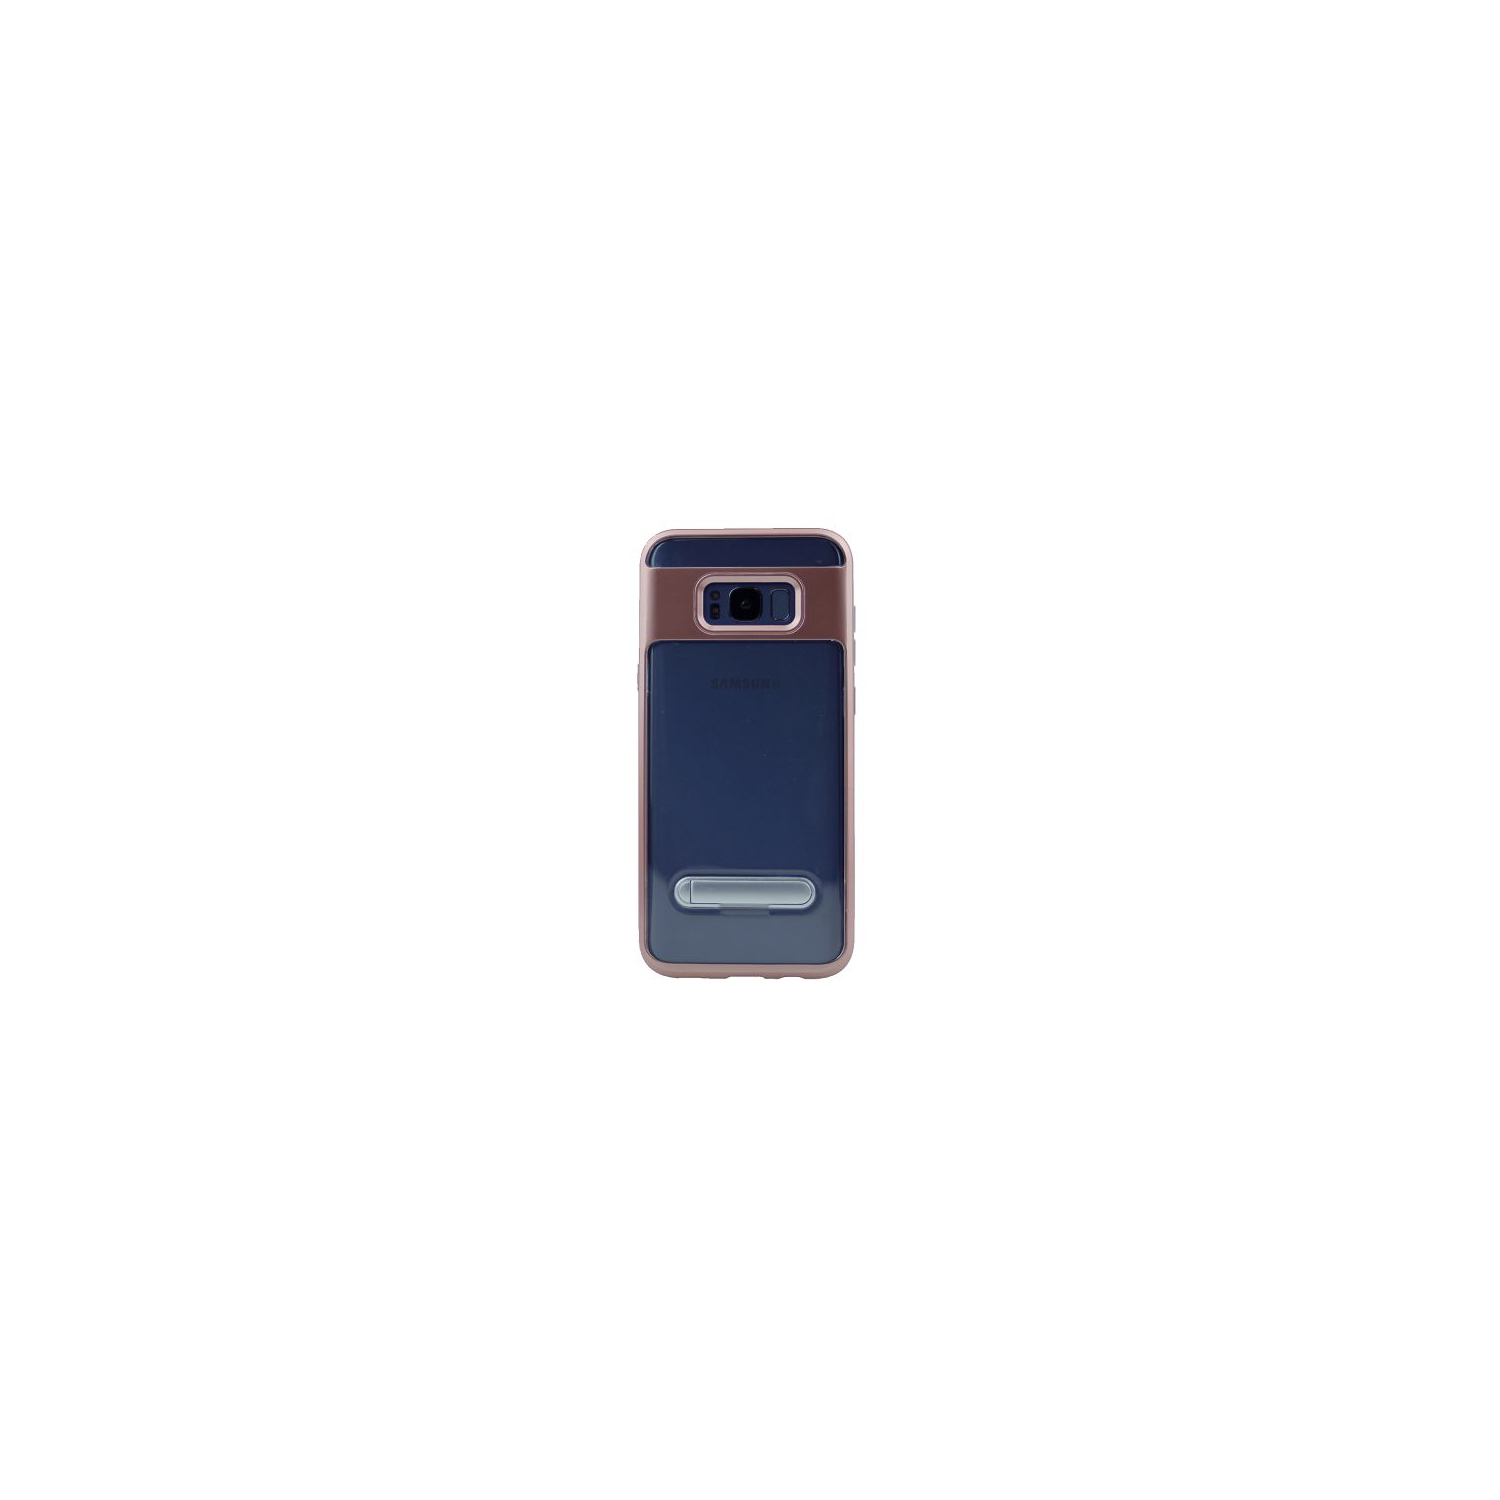 TopSave No Package will be included Slim clear tpu+hard frame rubber bumper for Samsung S8 Plus with kickstand, Rose Gold